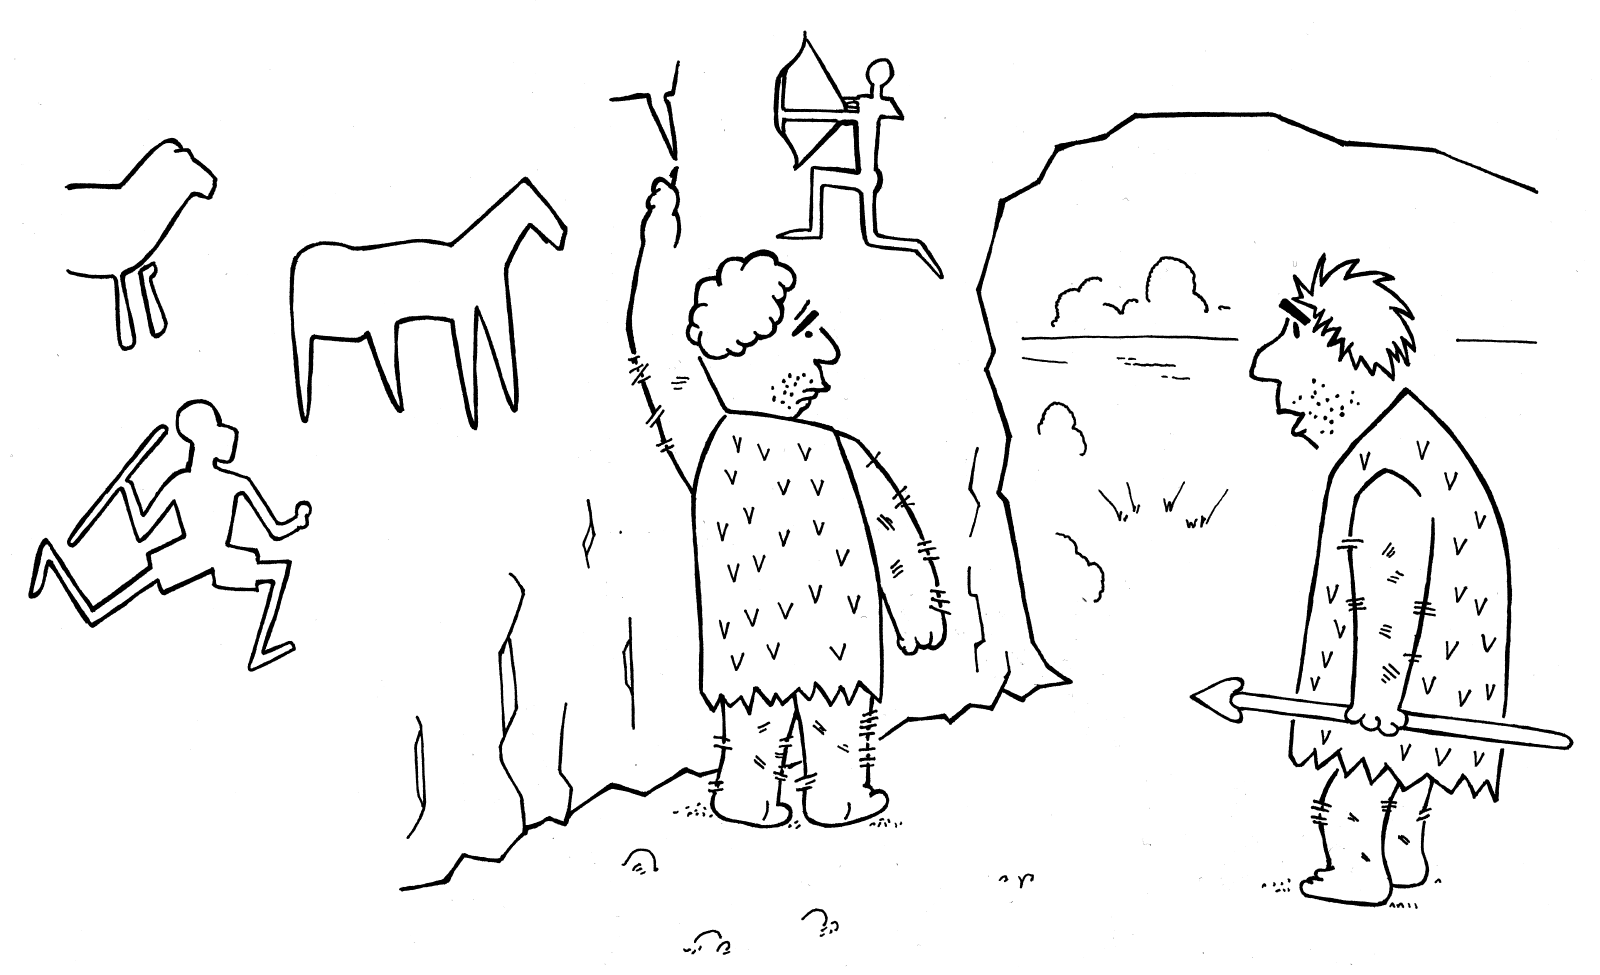 cartoon about cavemen one caveman drawing on a cave wall and the other saying the customer wants it on the other wall